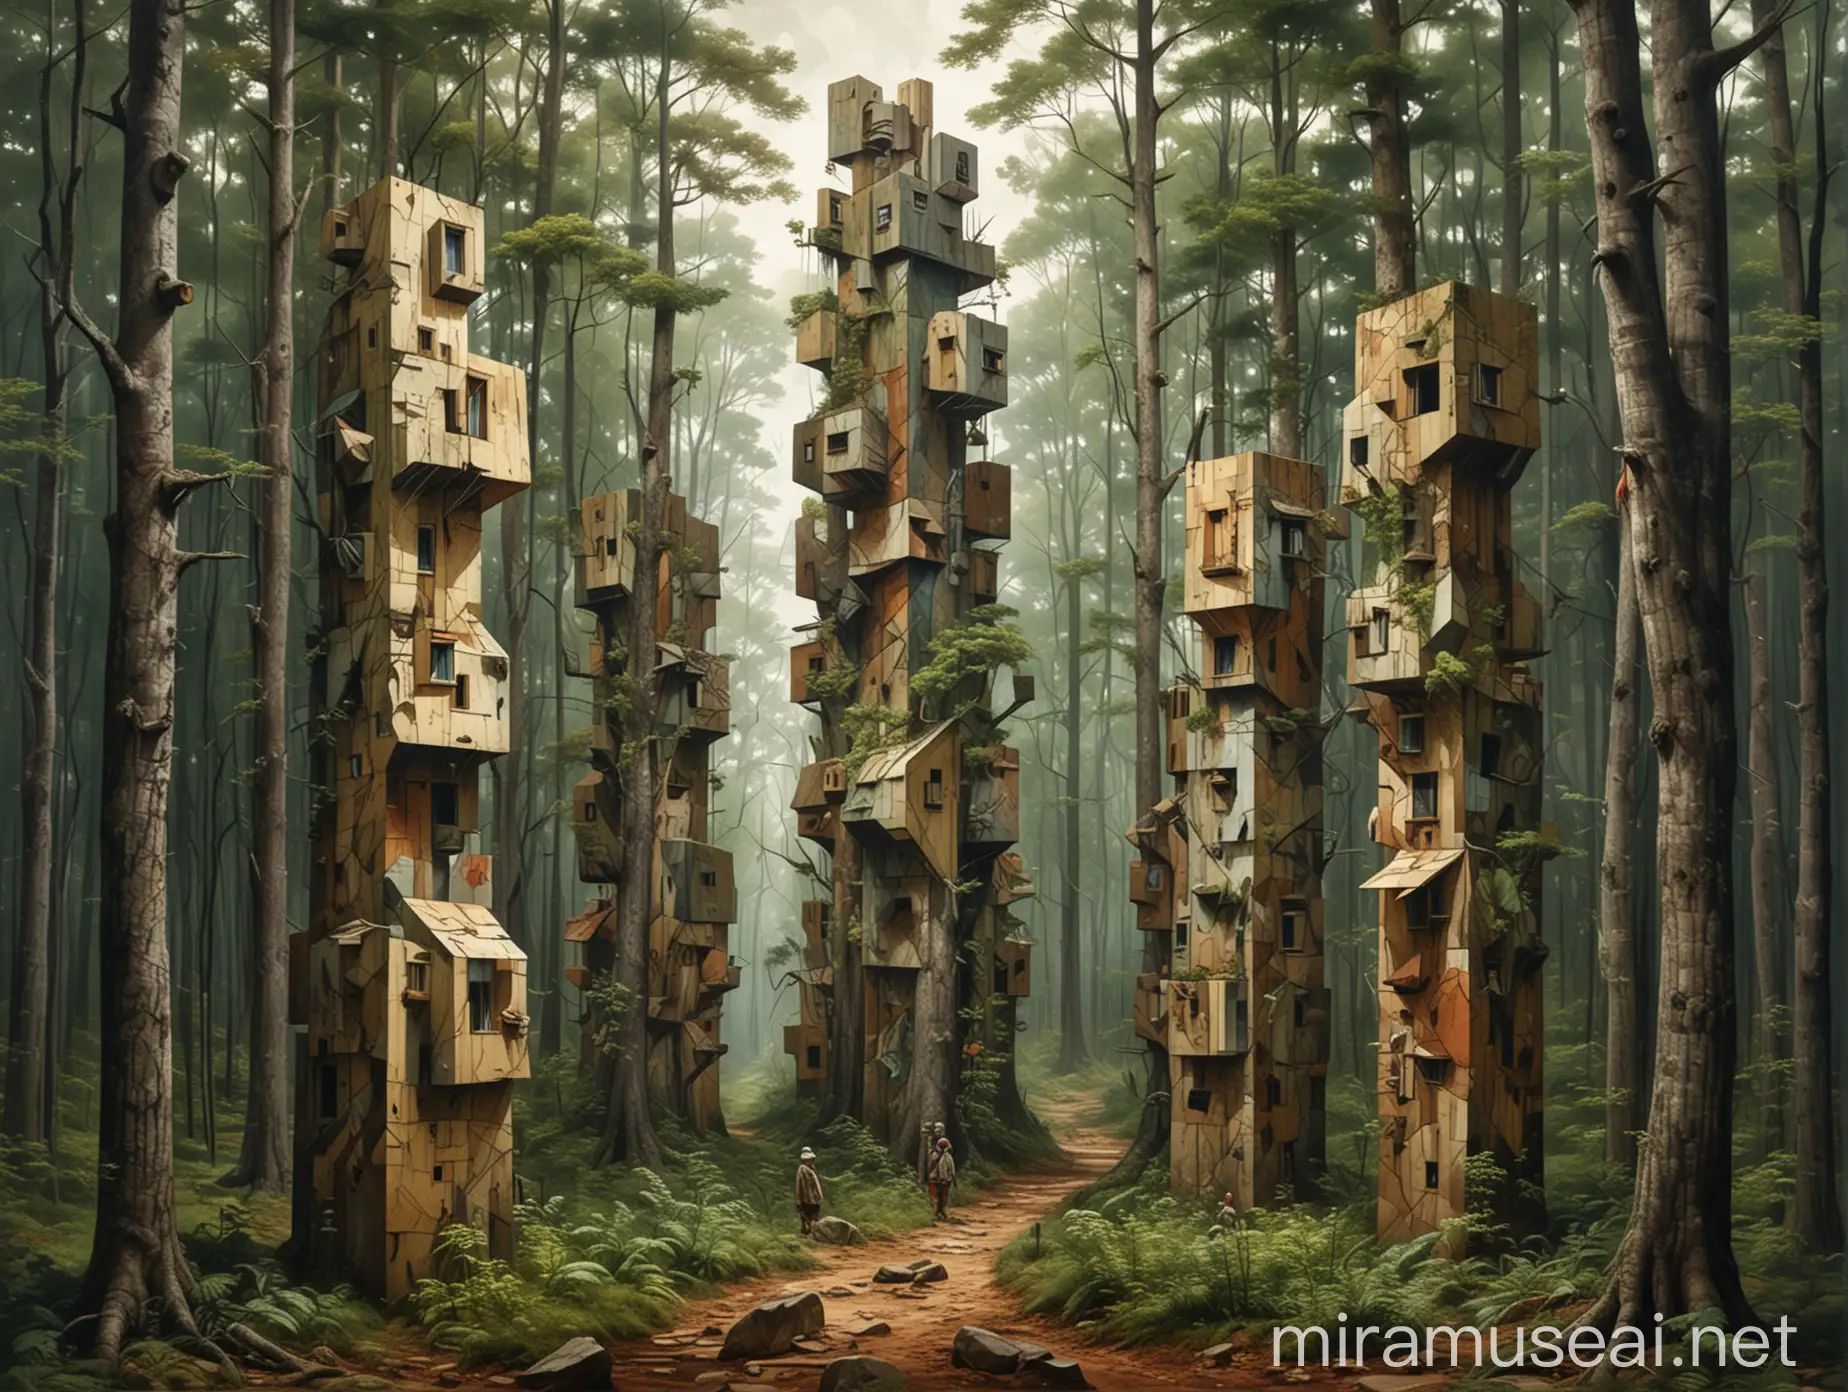 Cubist Wilderness Vibrant Figures Amid Towering Trees